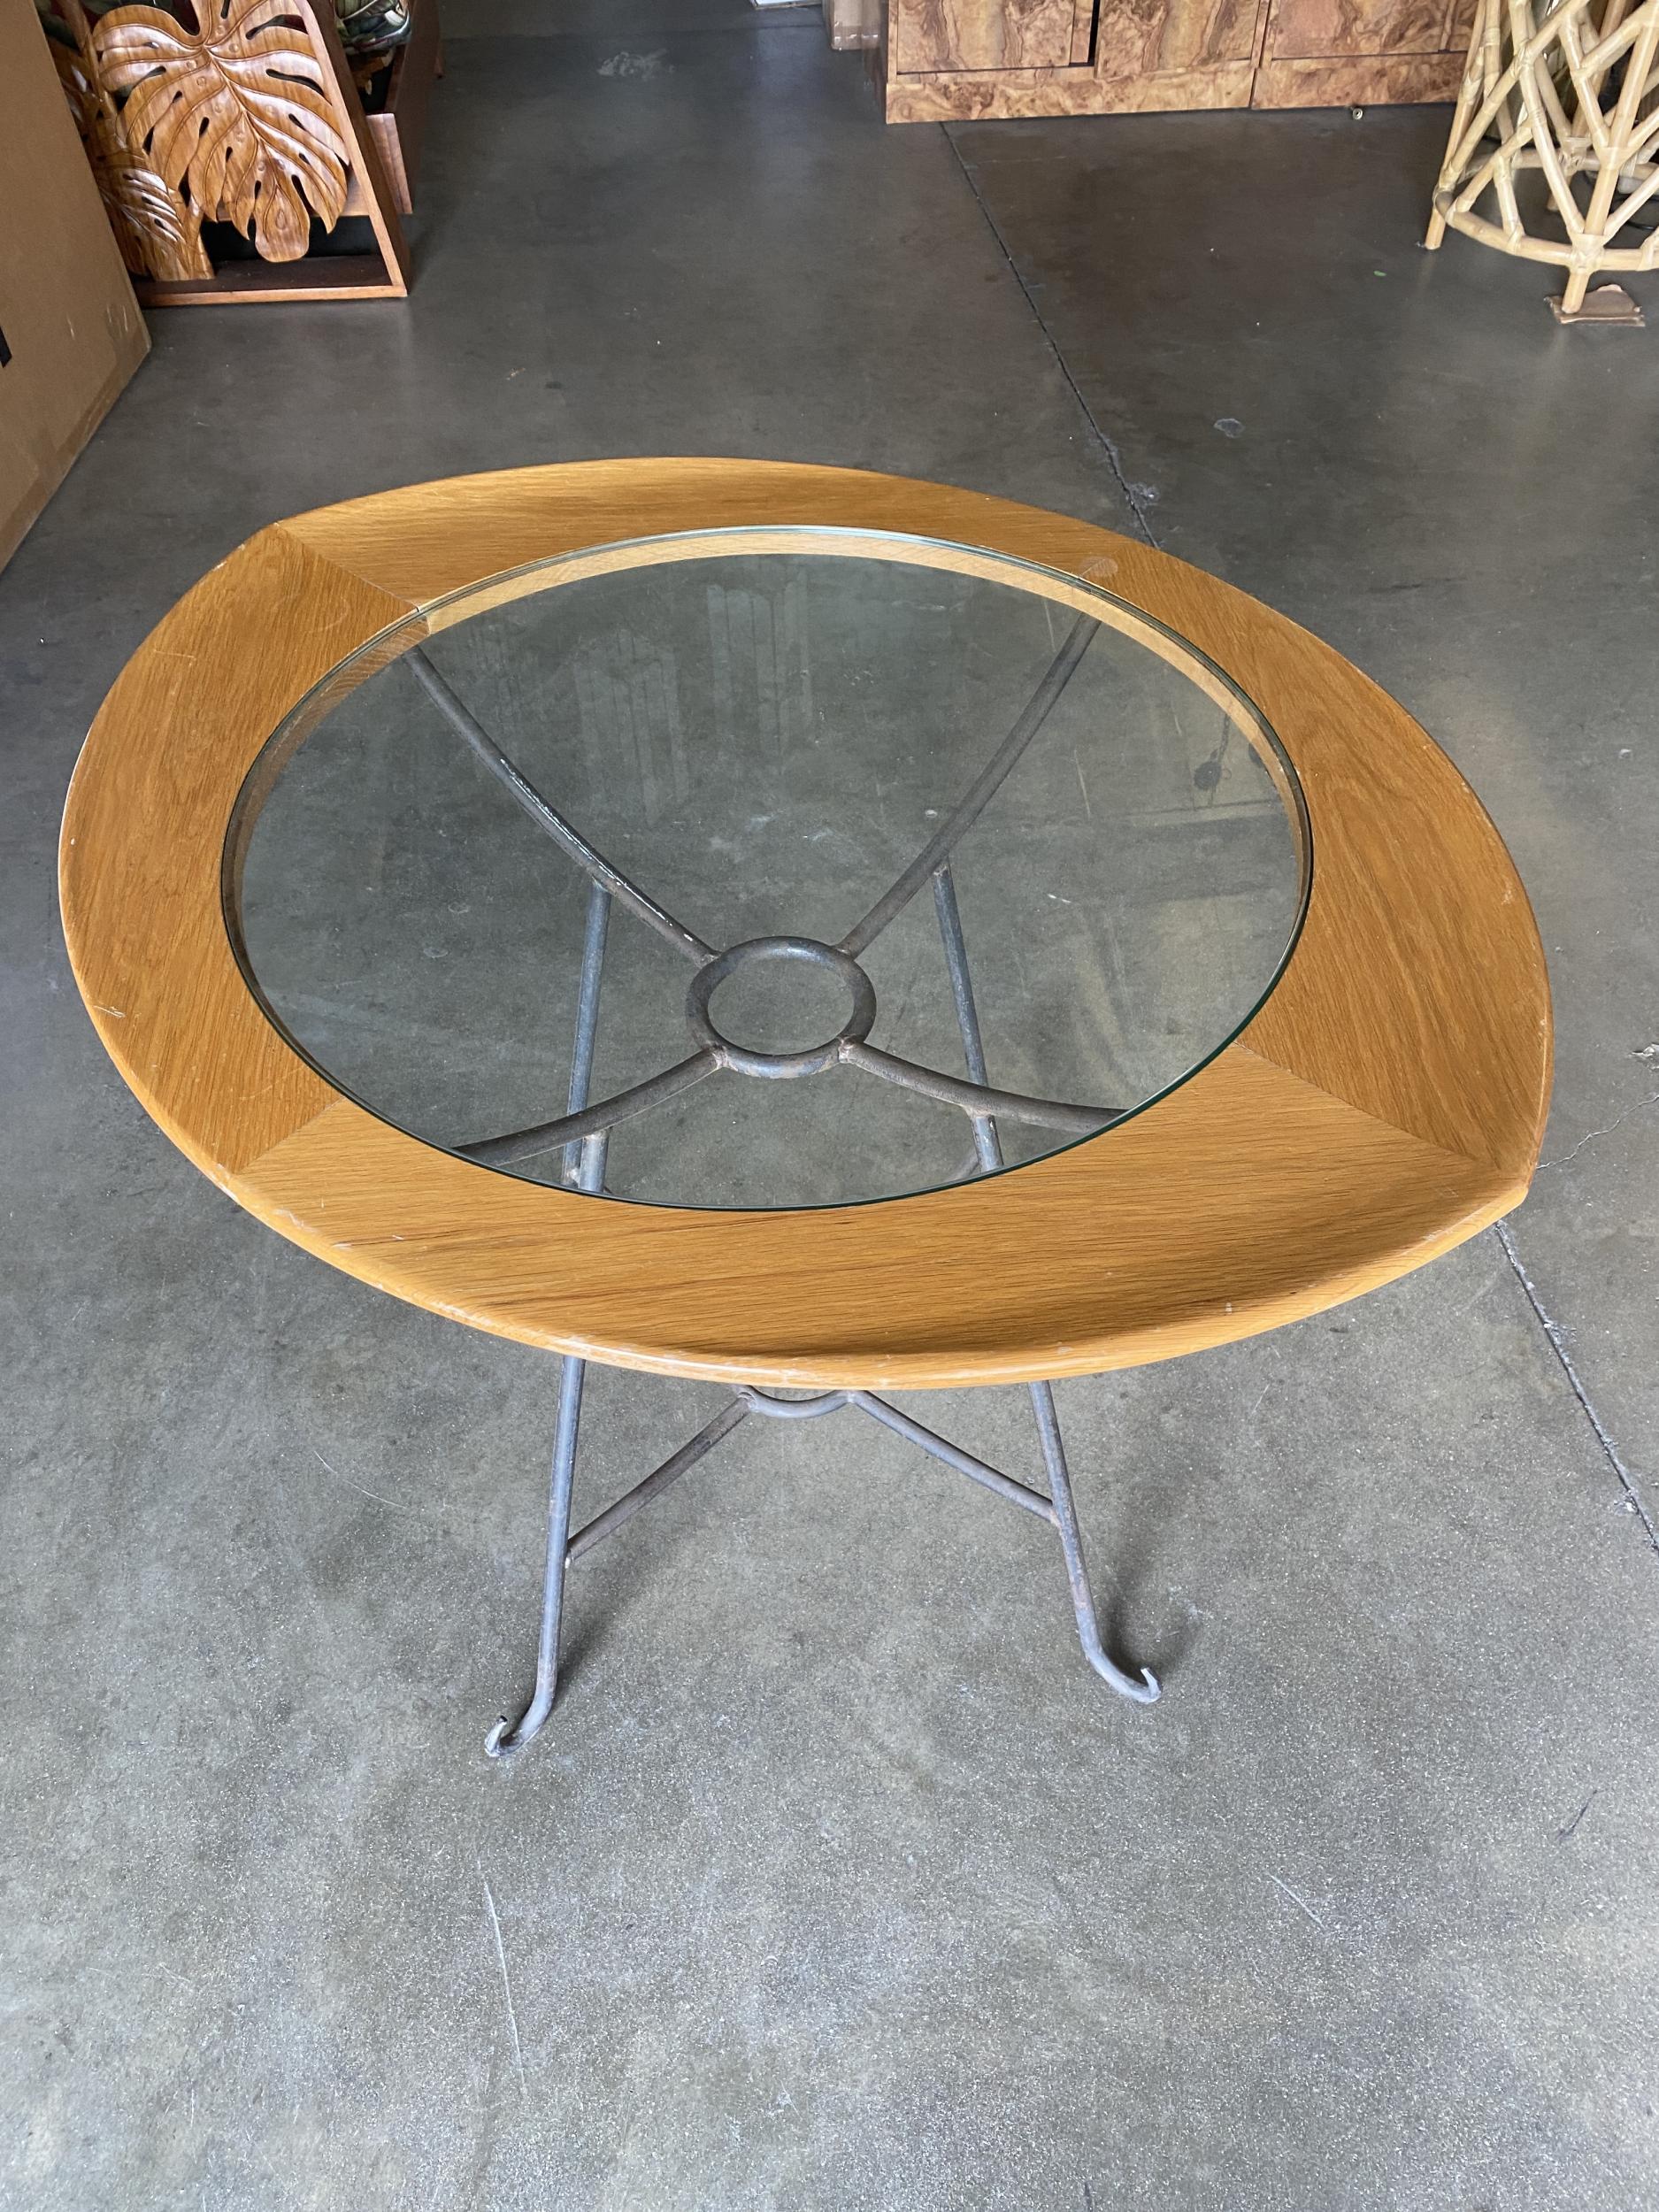 Rare Mid-Century Glass Center Two Person Breakfast Table In Excellent Condition For Sale In Van Nuys, CA